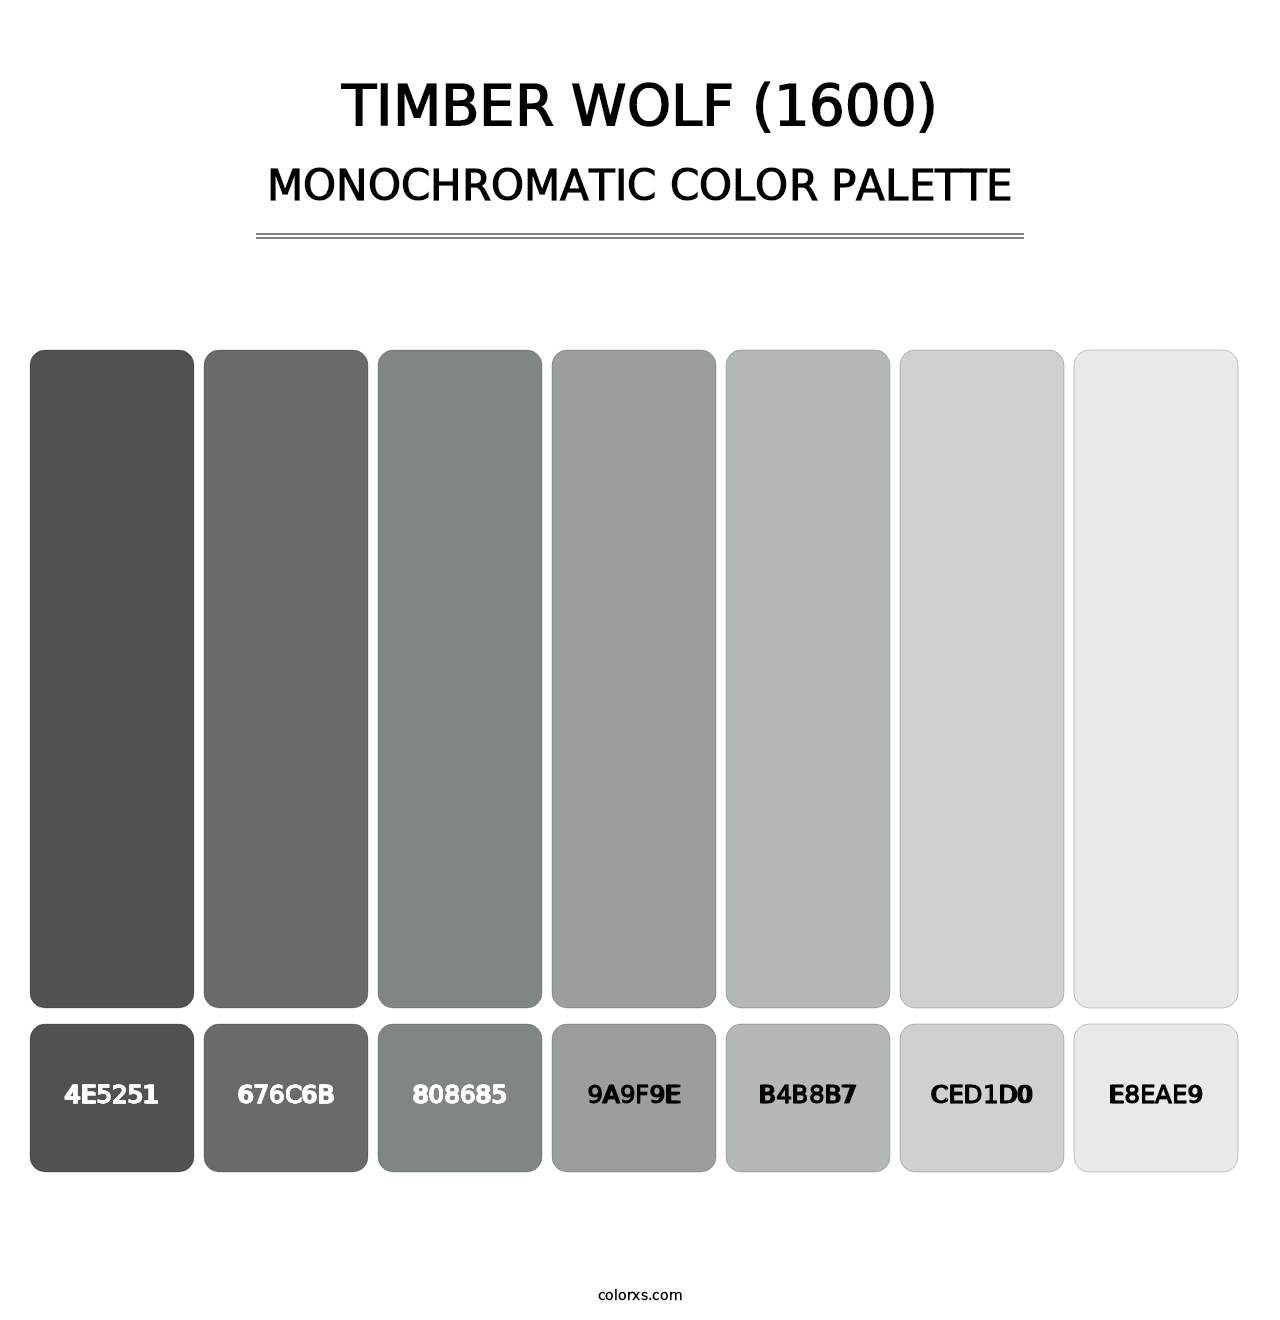 Timber Wolf (1600) - Monochromatic Color Palette